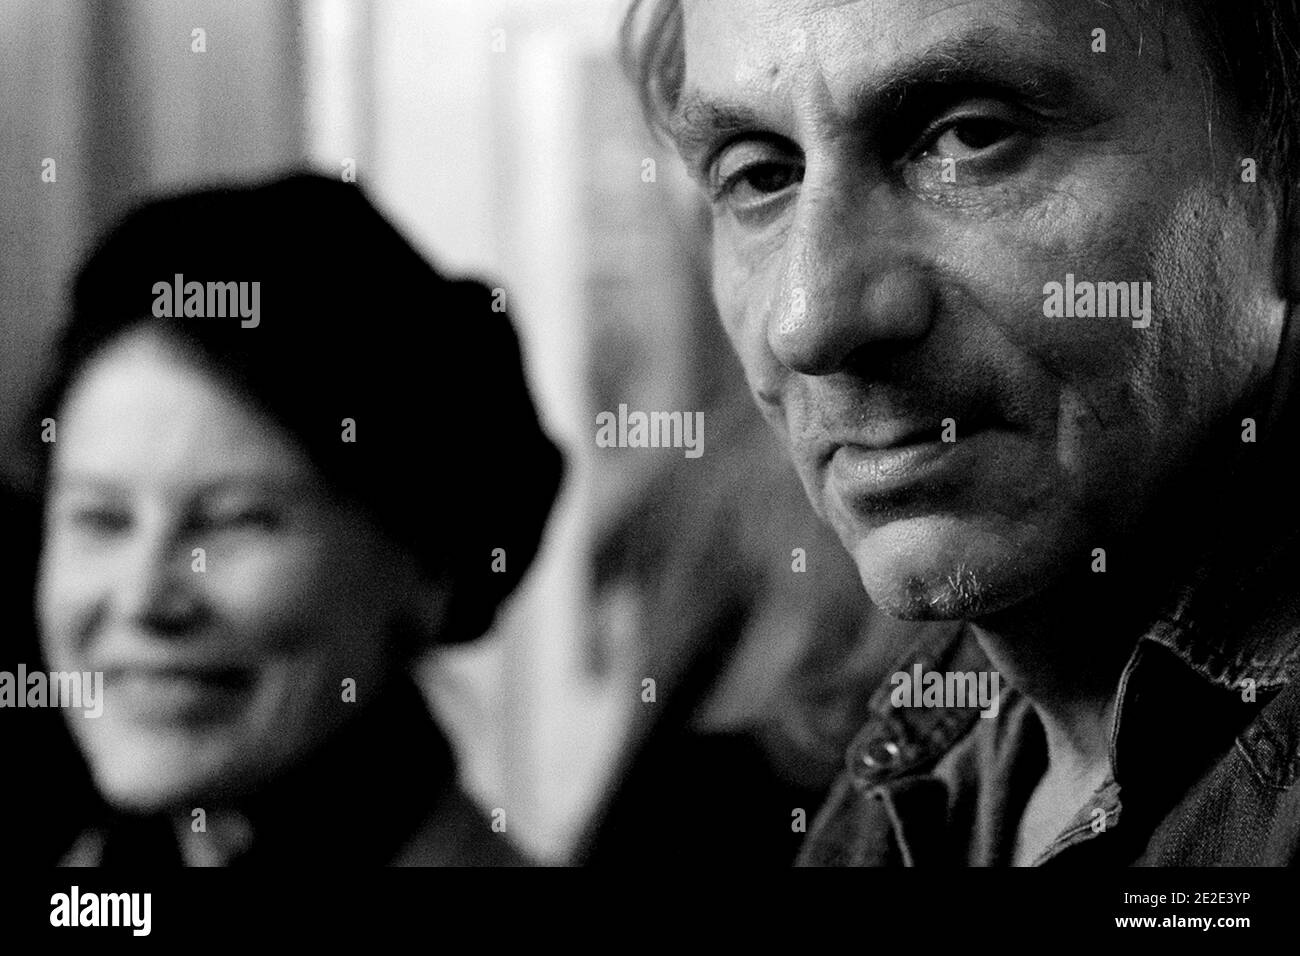 French writer Michel Houellebecq is pictured during the 30 Millions d Amis literary prize on November 22, 2011, at the Drouant restaurant in Paris, France. The 30 Millions d Amis prize is considered as France's most prestigious literary prize for novels speaking of 'animals' and is named as the 'Goncourt des Animaux'. Photo by Stephane Lemouton/ABACAPRESS.COM Stock Photo